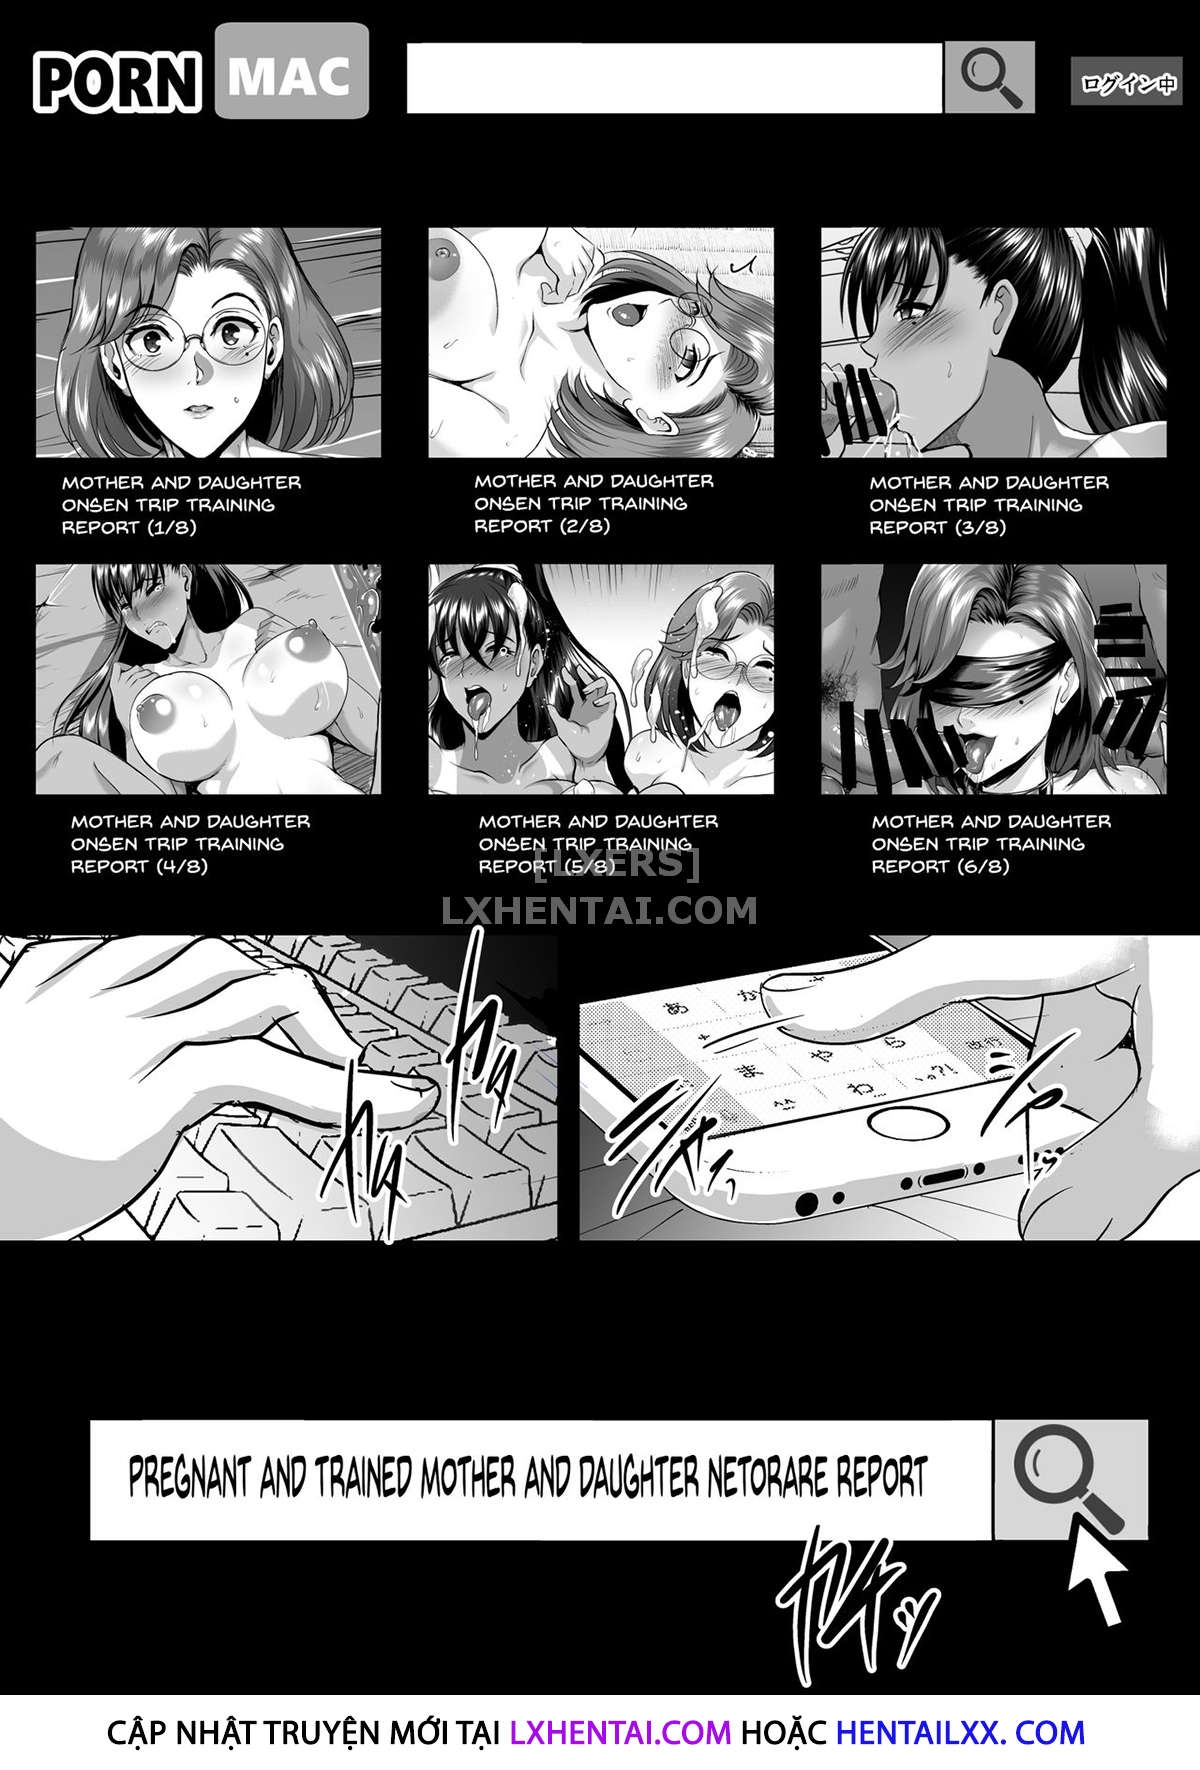 Xem ảnh 1619177285217_0 trong truyện hentai Finished Impregnation Training - Mother And Daughter Ntr Records - One Shot - Truyenhentai18.net